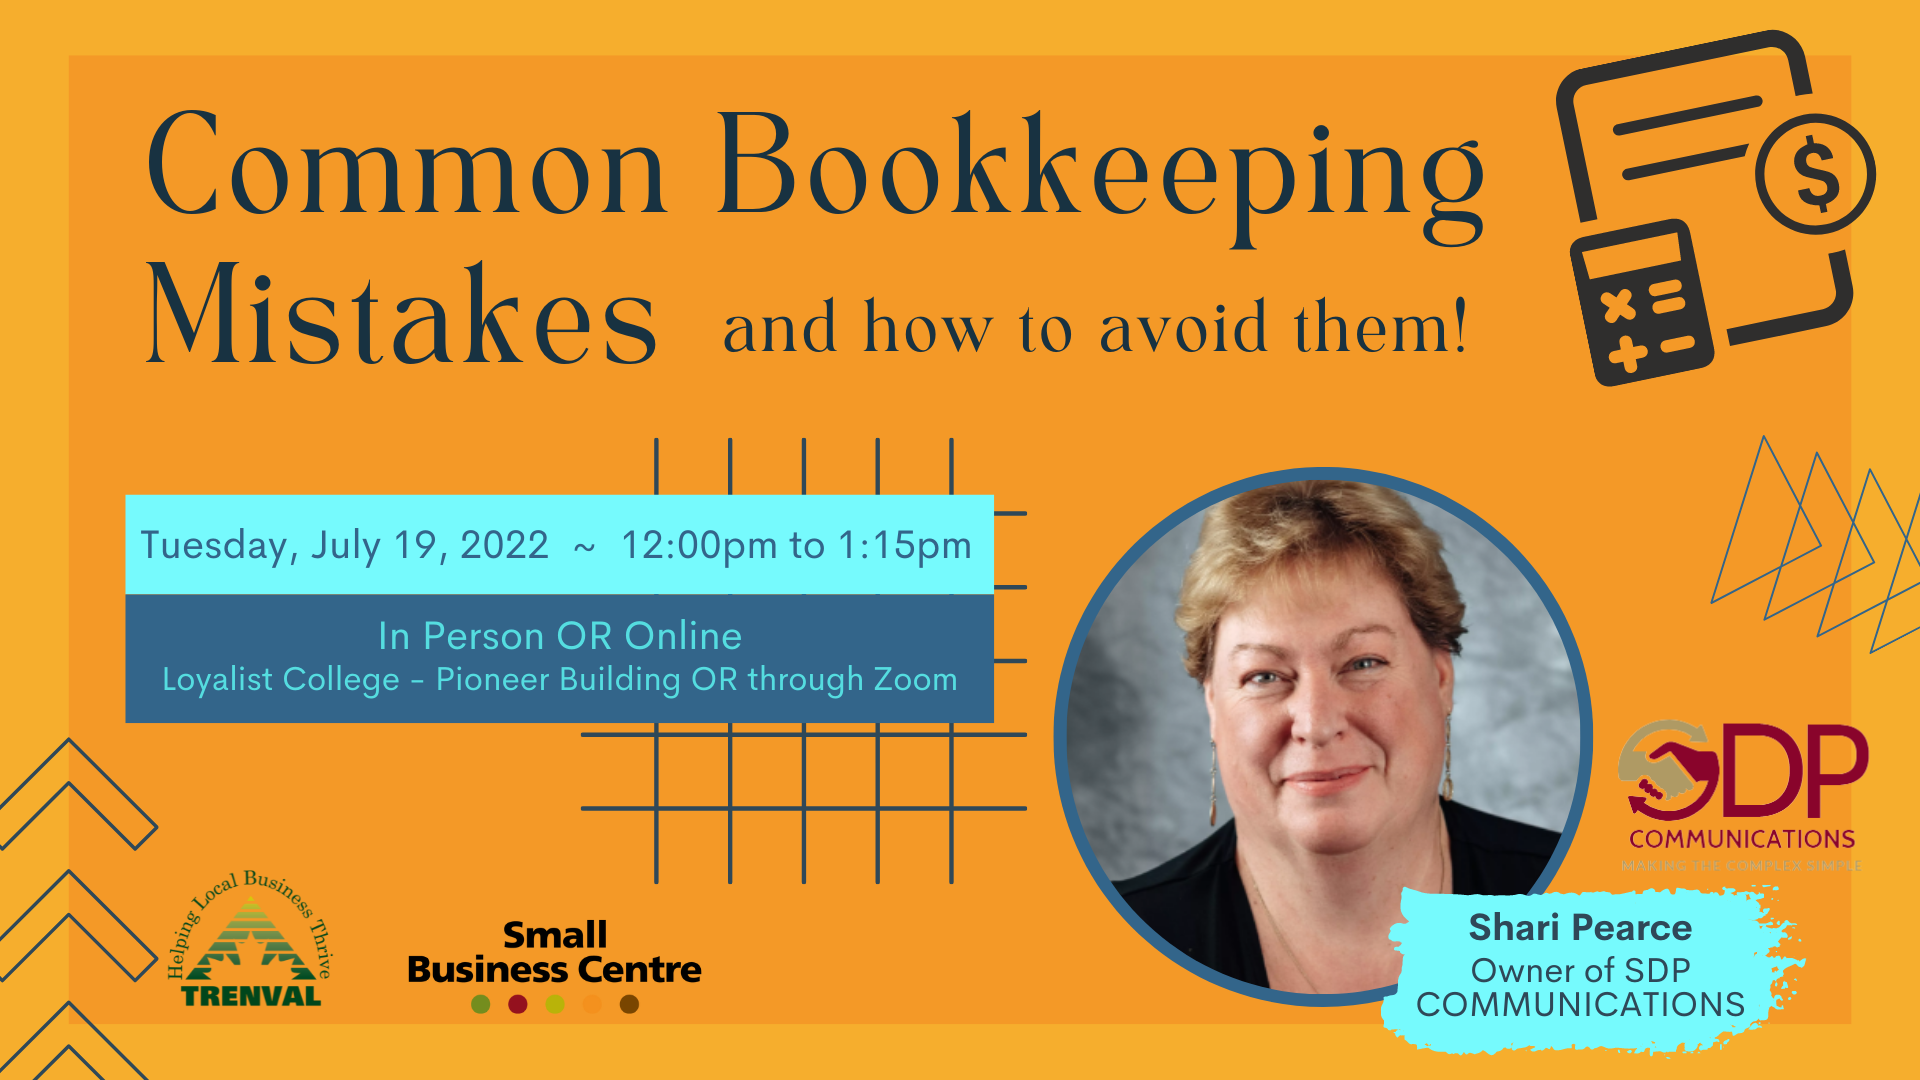 July 19 Common Bookkeeping Mistakes and how to avoid them